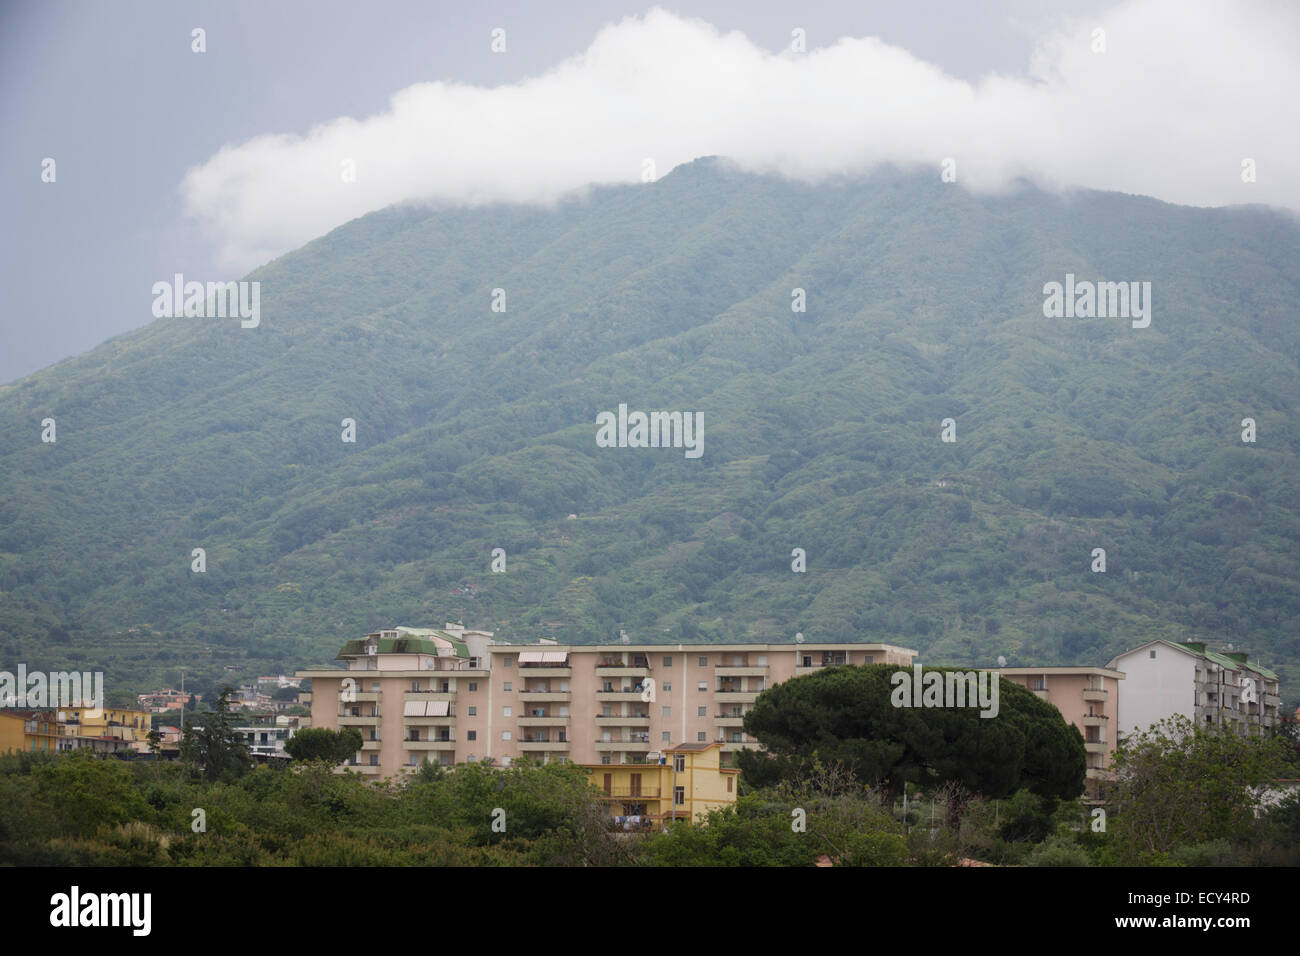 Local housing beneath the slopes of the Vesuvius Volcano which last erupted in 1944. Stock Photo